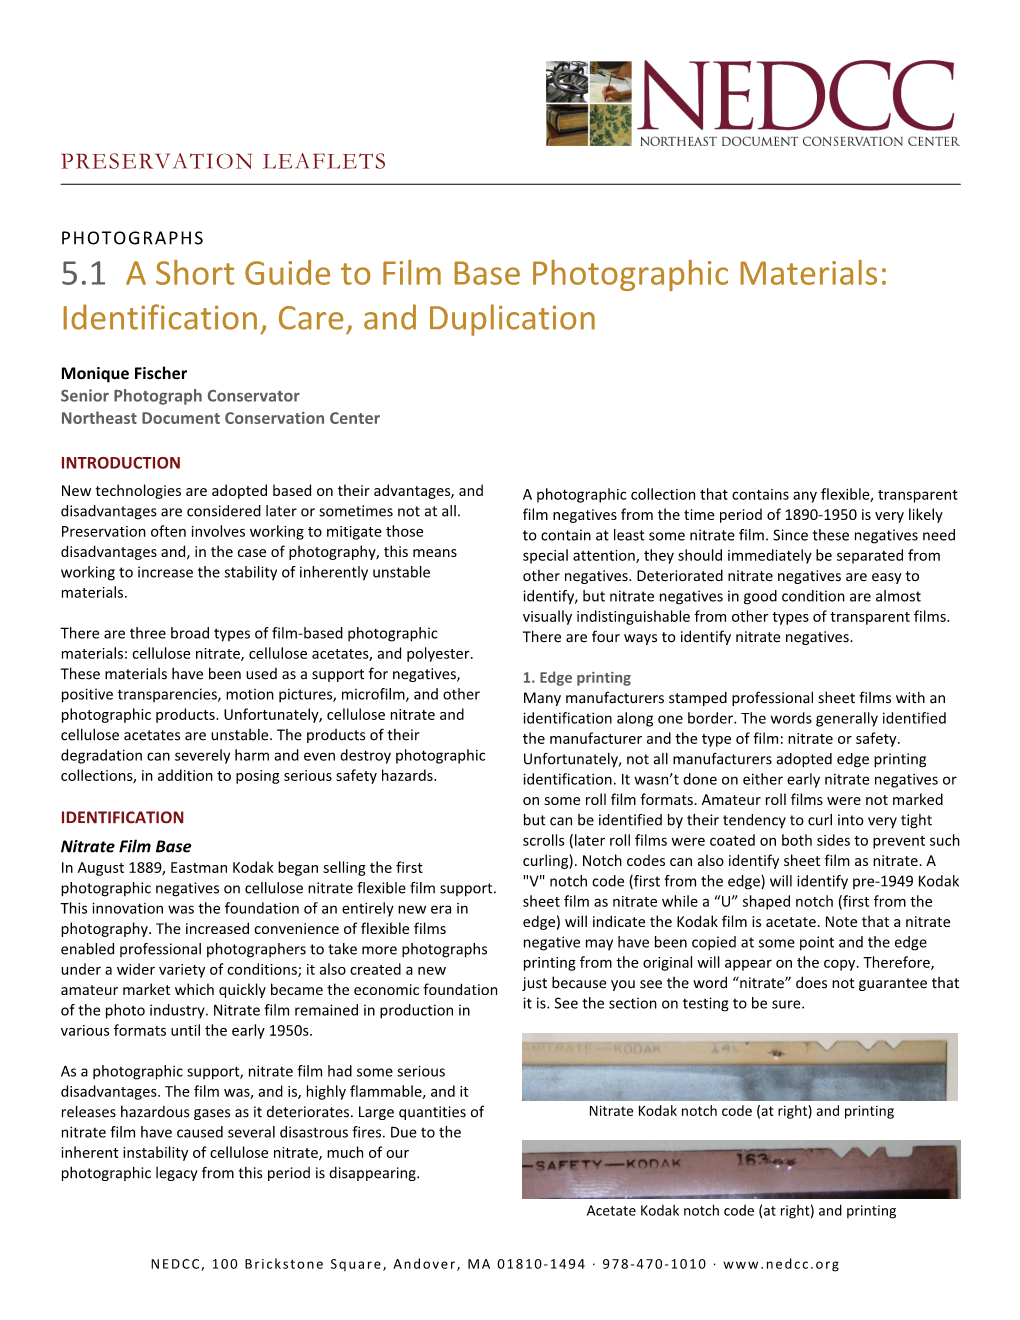 5.1 a Short Guide to Film Base Photographic Materials: Identification, Care, and Duplication